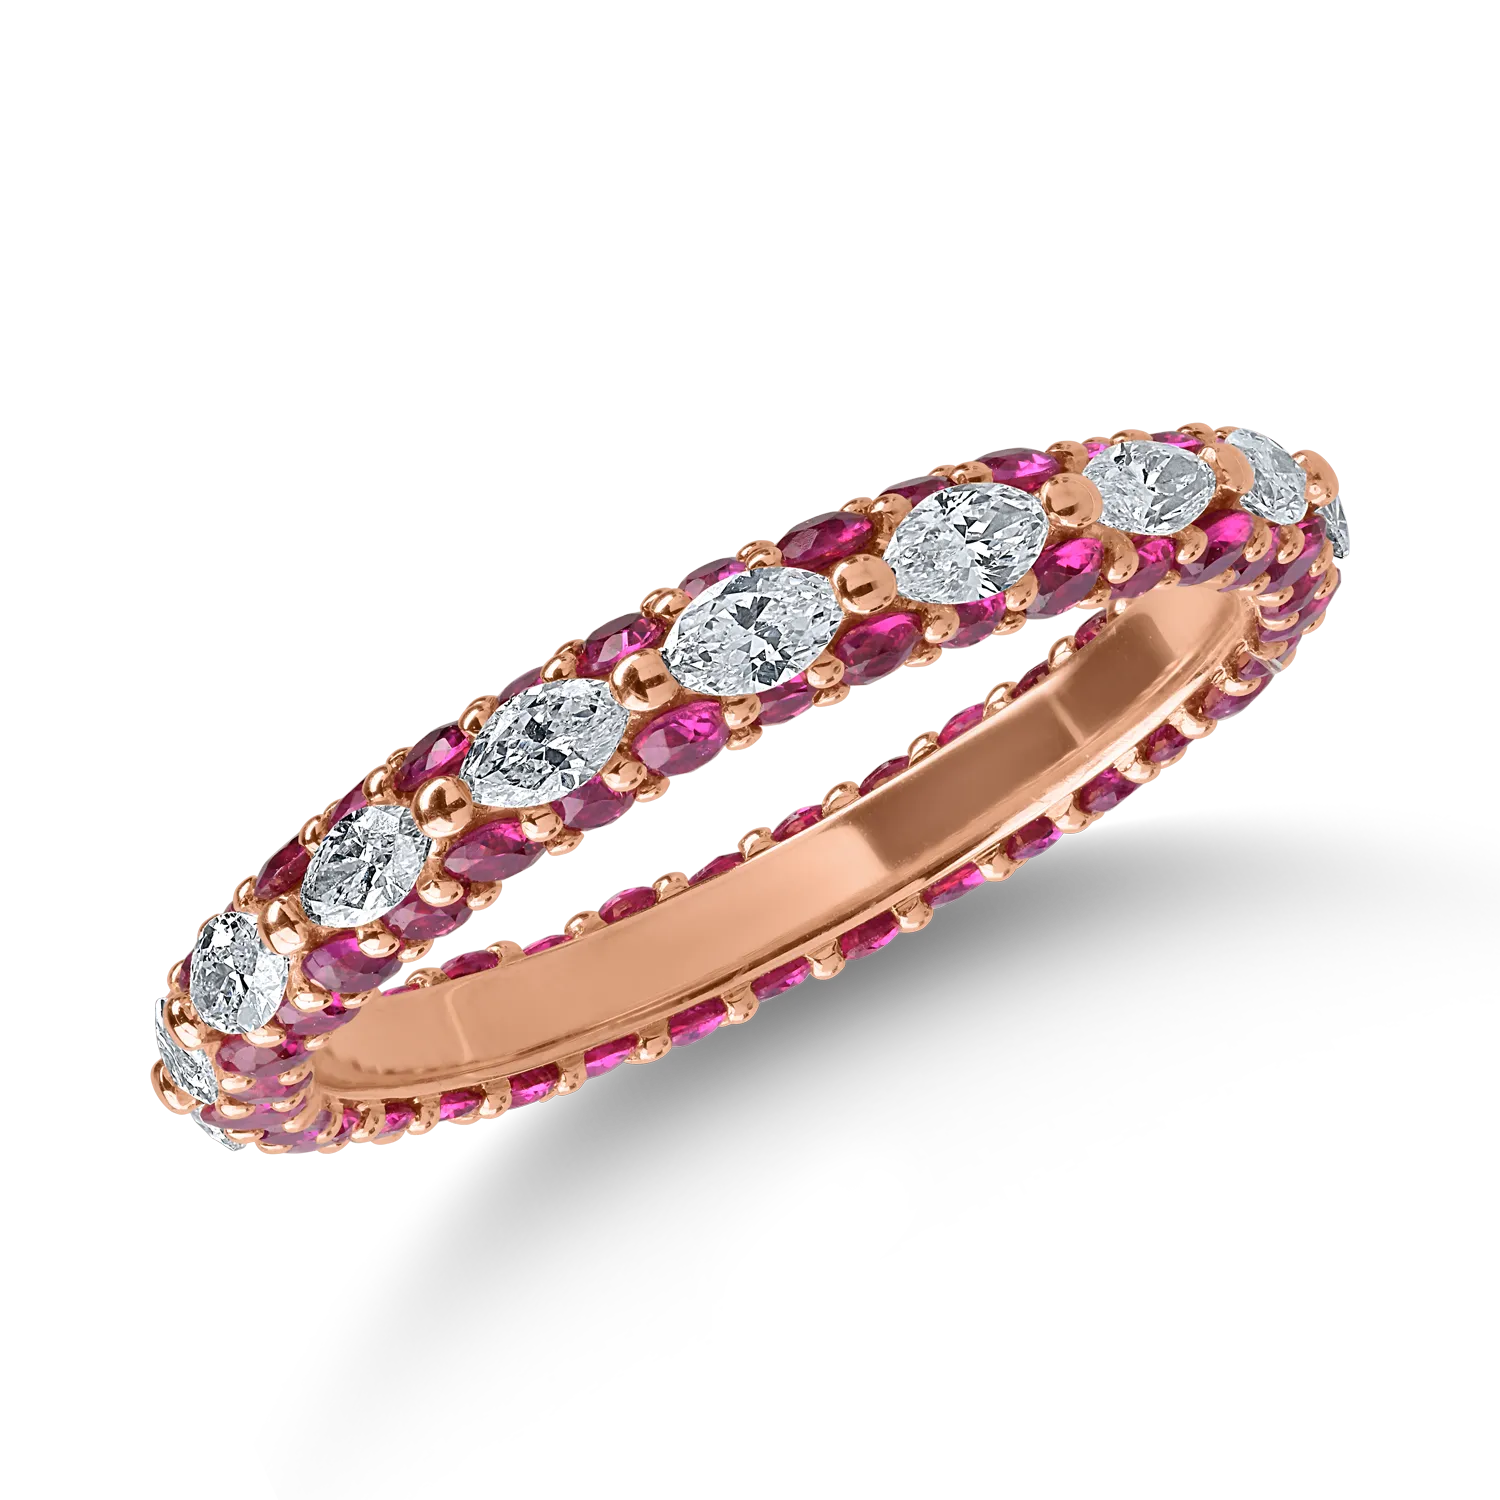 Eternity ring in rose gold with 0.6ct diamonds and 1.2ct rubies